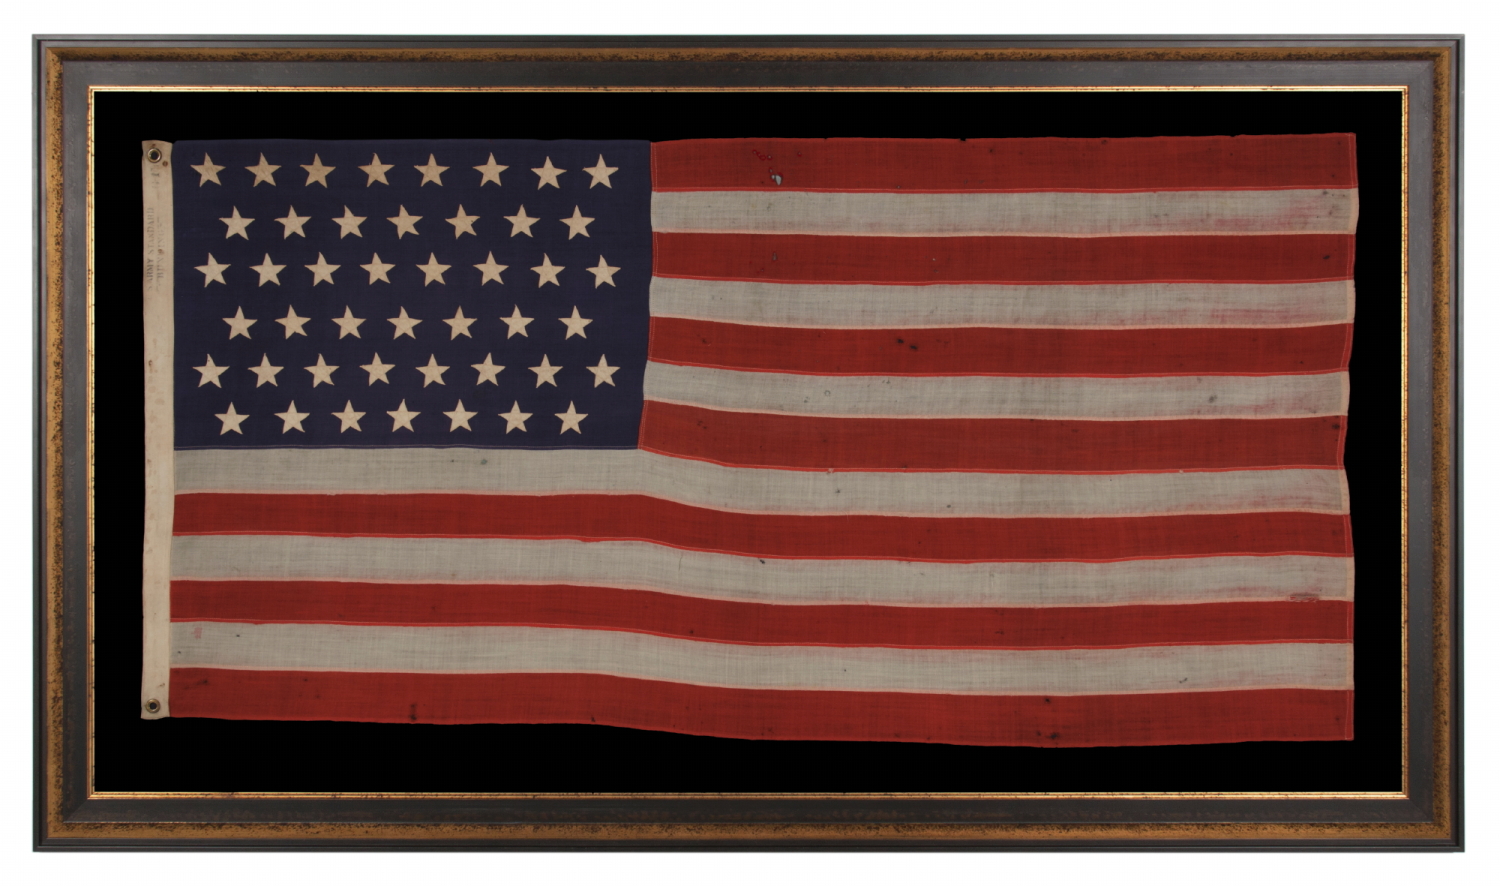 45 STAR ANTIQUE AMERICAN FLAG, MARKED "U.S. ARMY STANDARD BUNTING,” SPANISH-AMERICAN WAR ERA, REFLECTS THE ADDITION OF UTAH AS THE 45TH STATE, 1896-1907